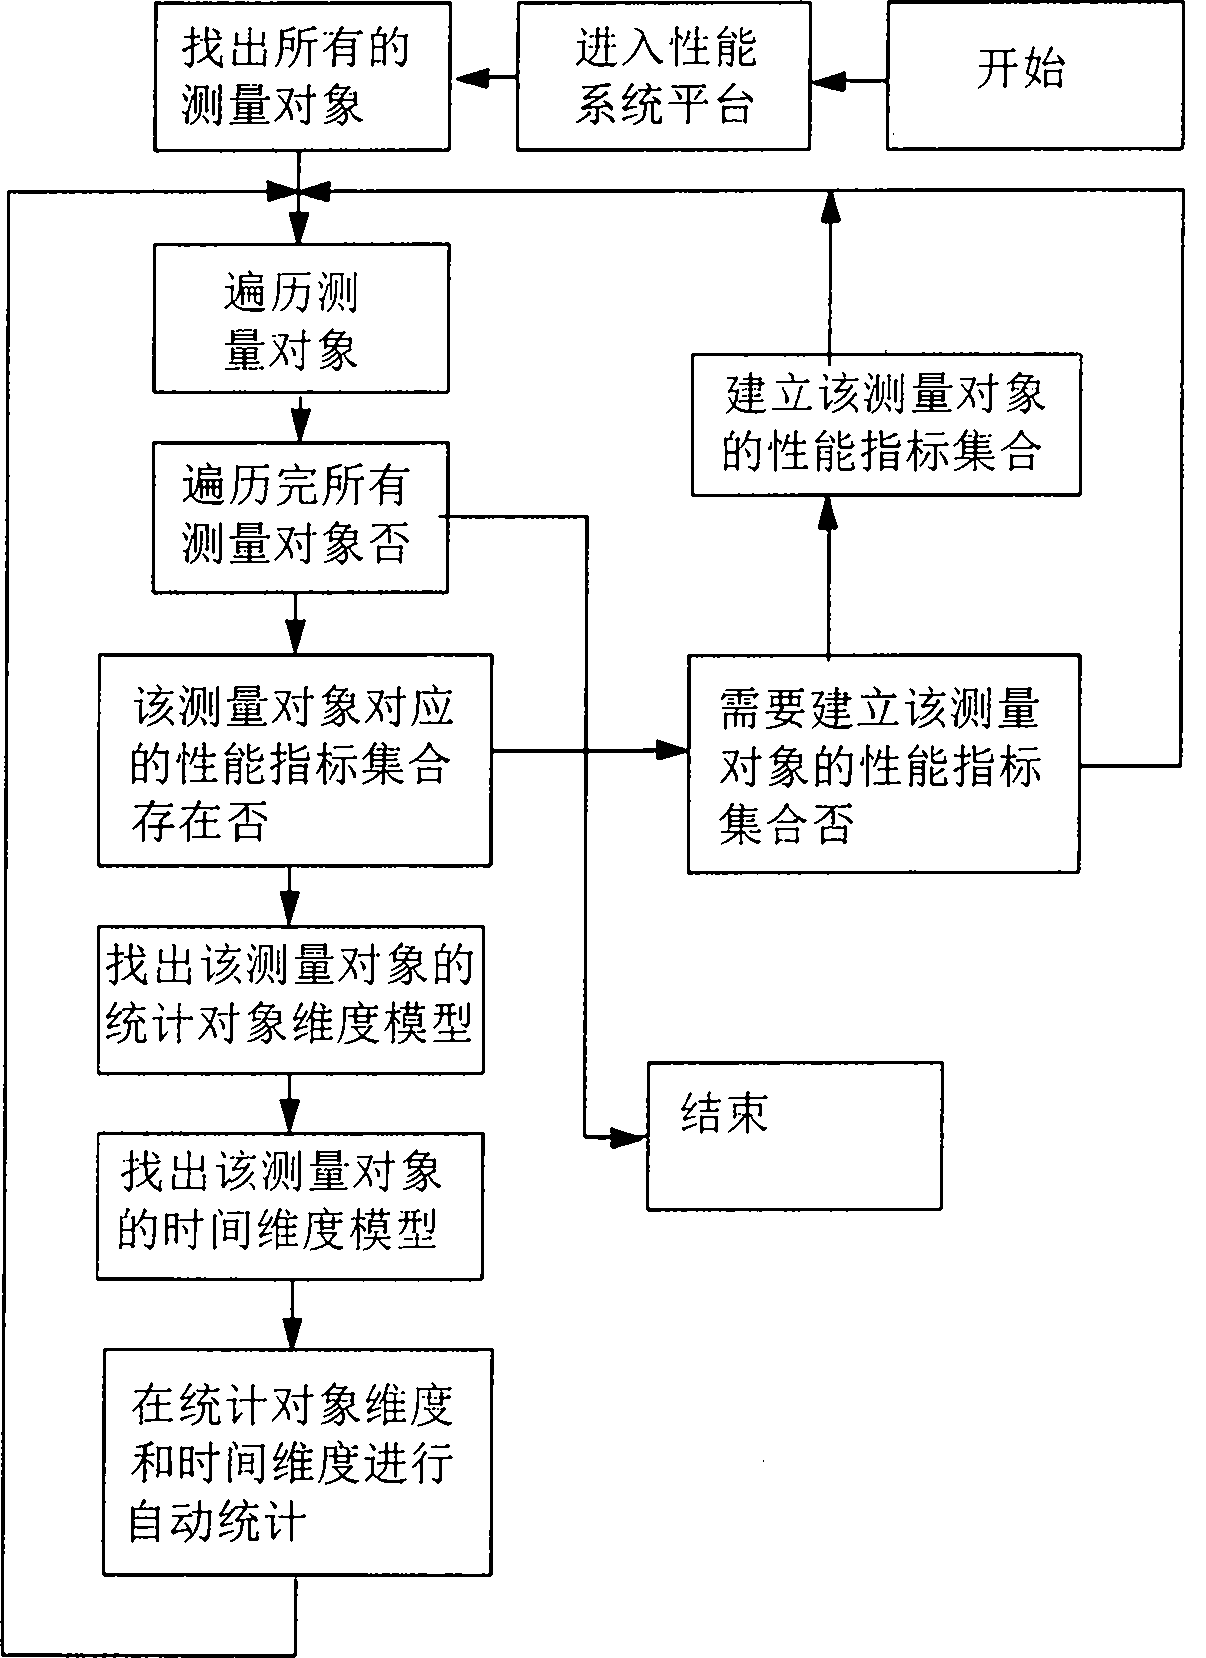 Multi-dimension statistical method of testing objects in communication performance network management system